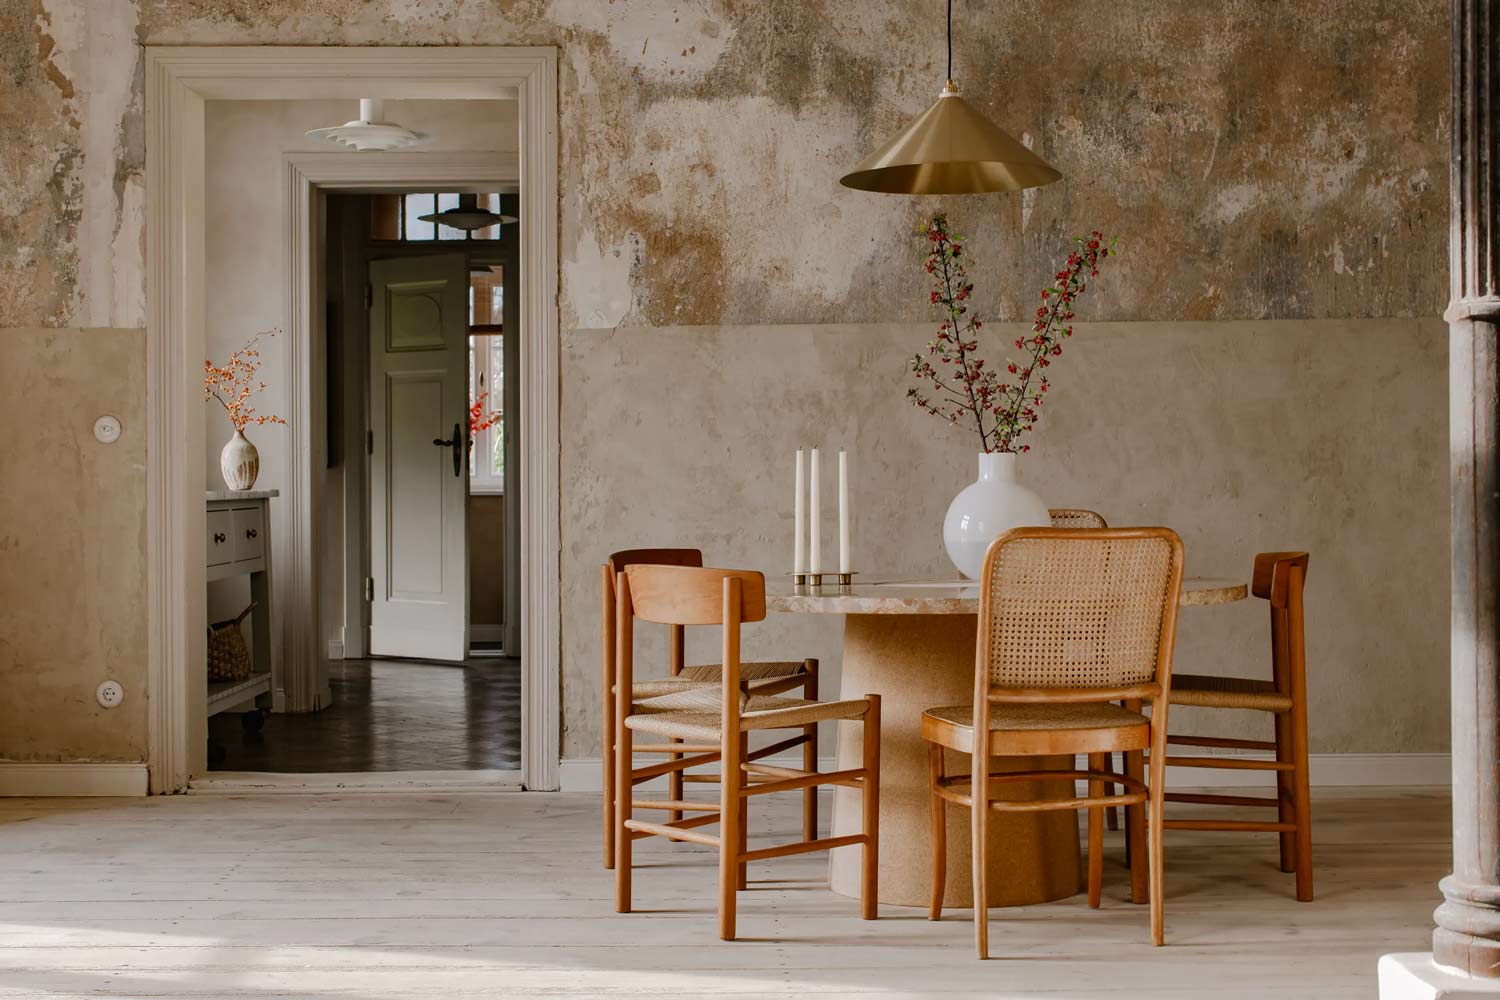 A wabi sabi inspired kitchen and dining room with a natural colour palette and textured walls